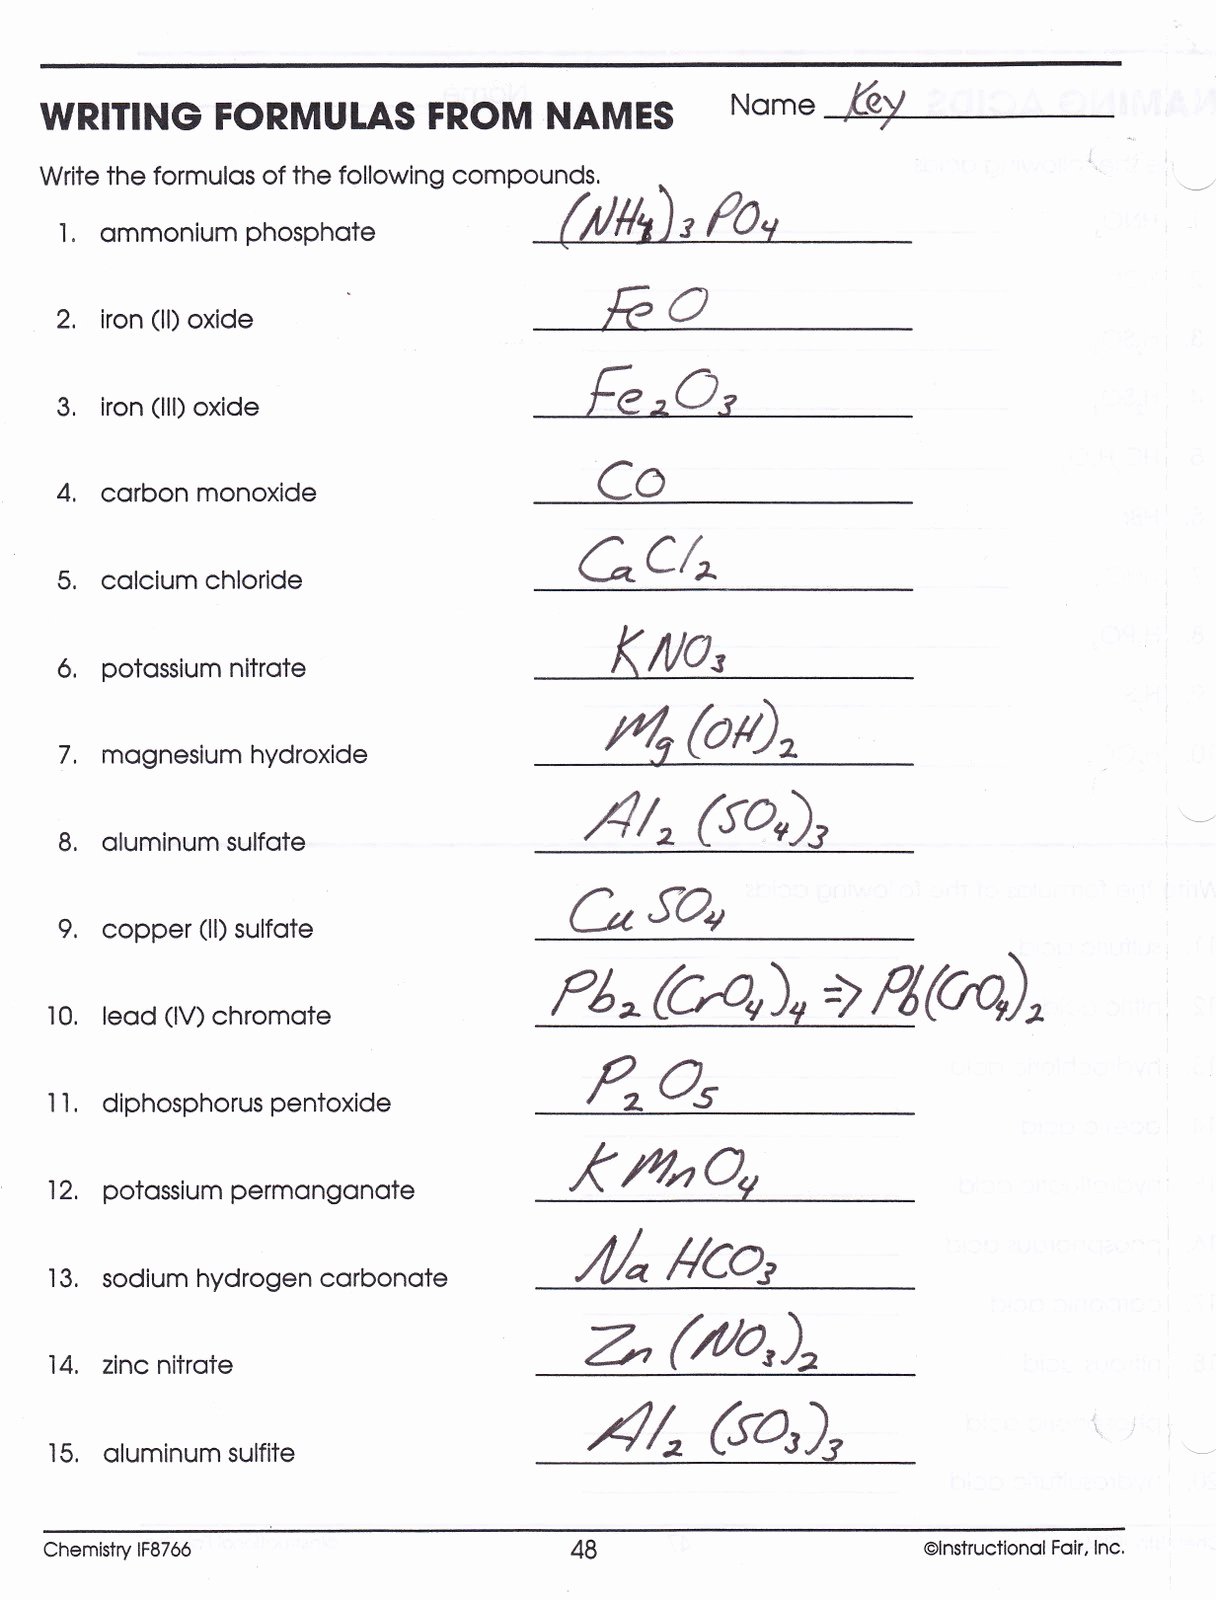 Compounds Names and formulas Worksheet Elegant Heritage High School Chemistry 2010 11 Writing Pound